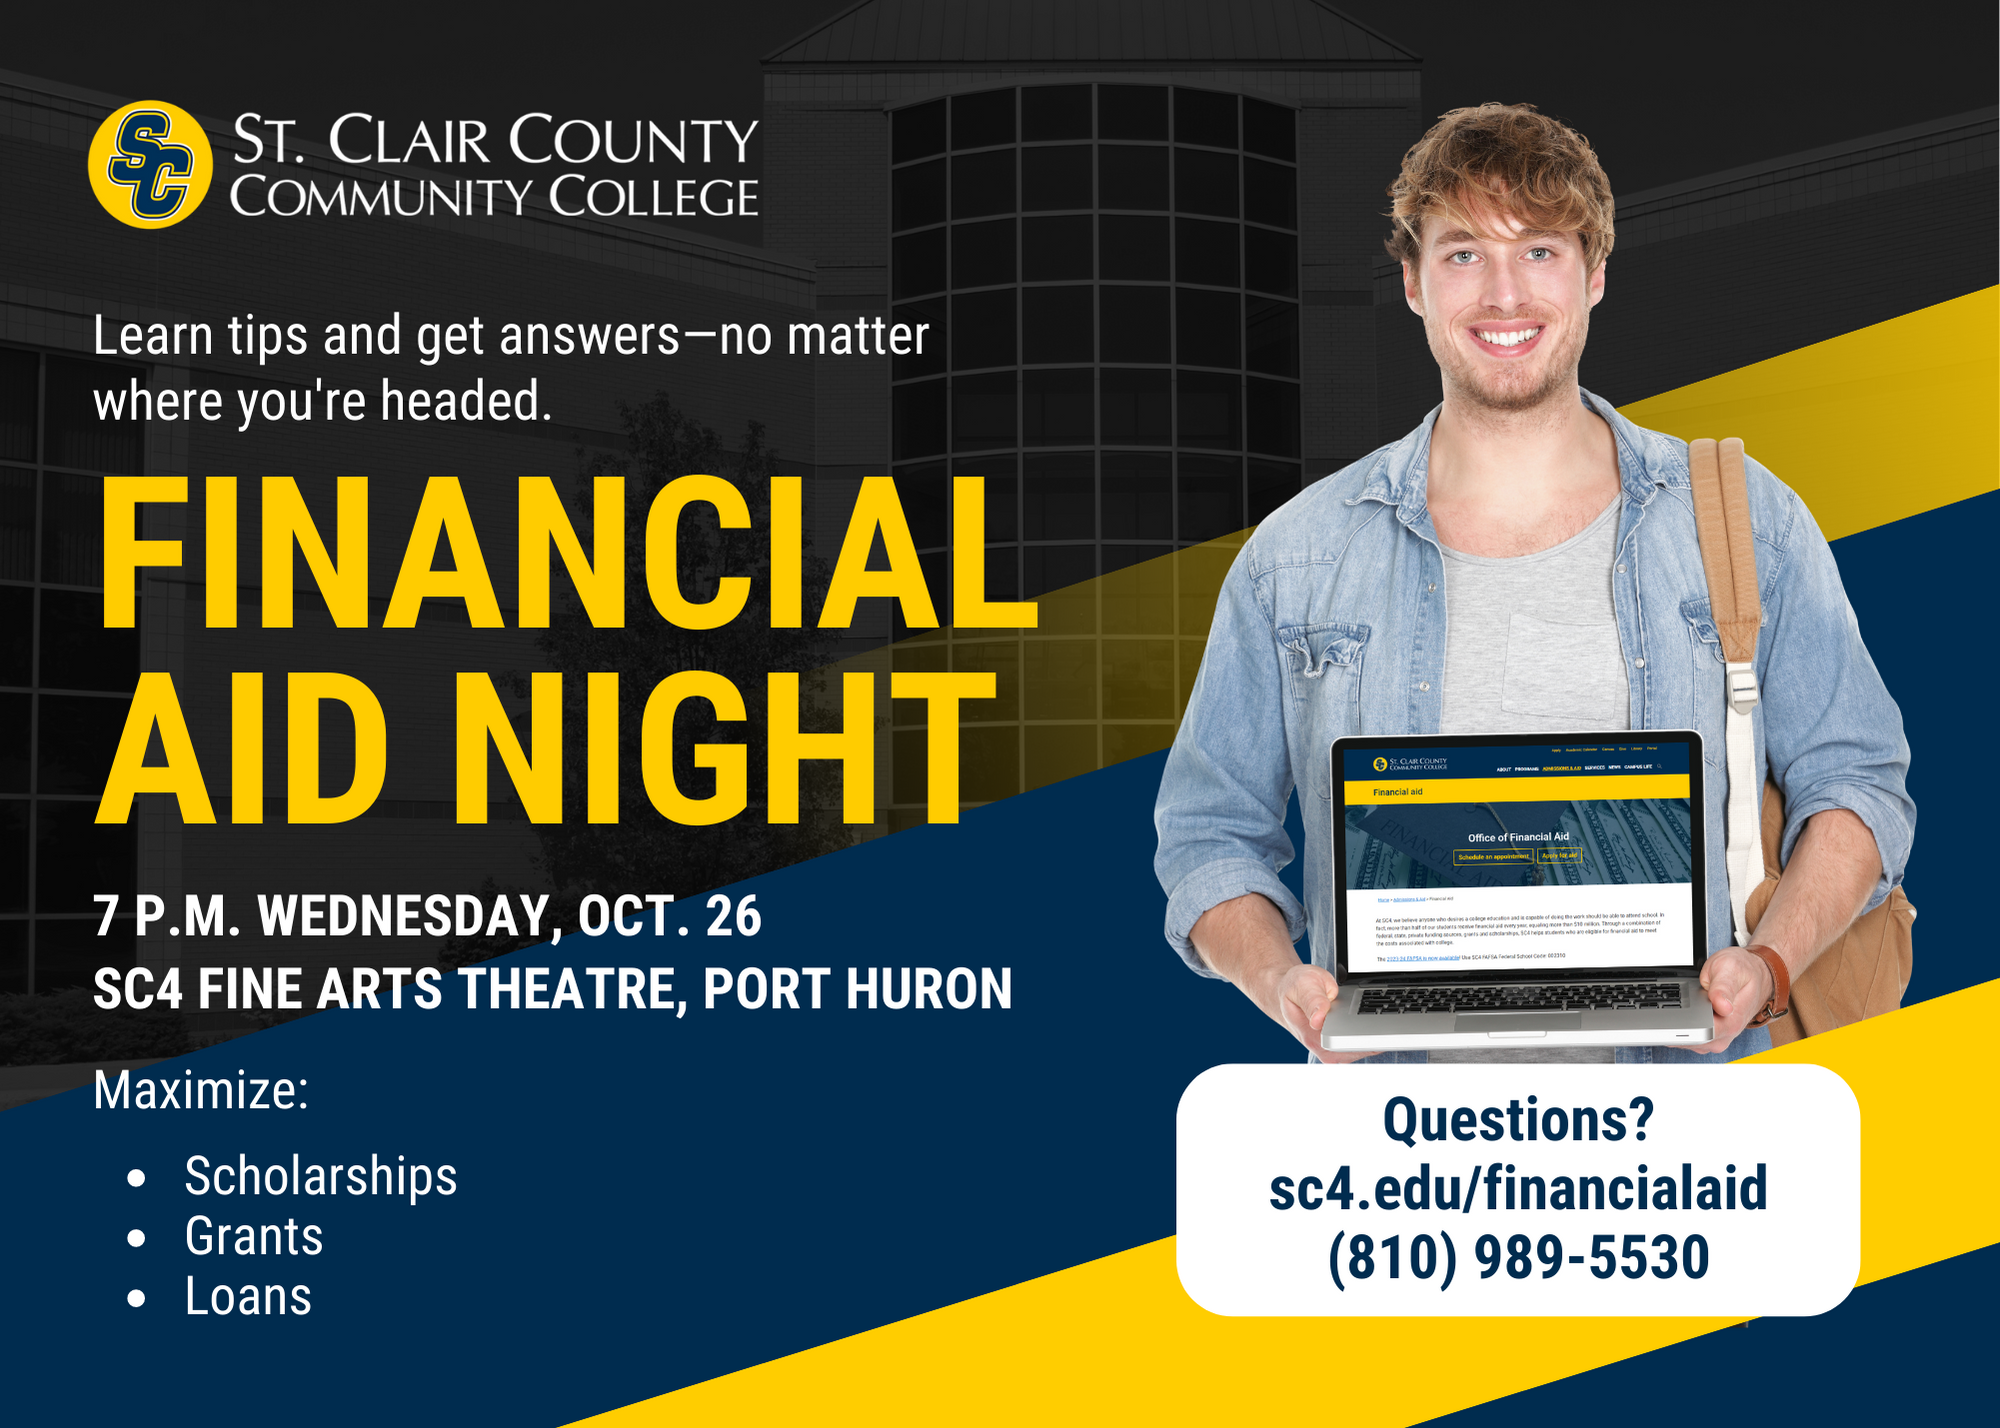 FInancial Aid Night mailer image